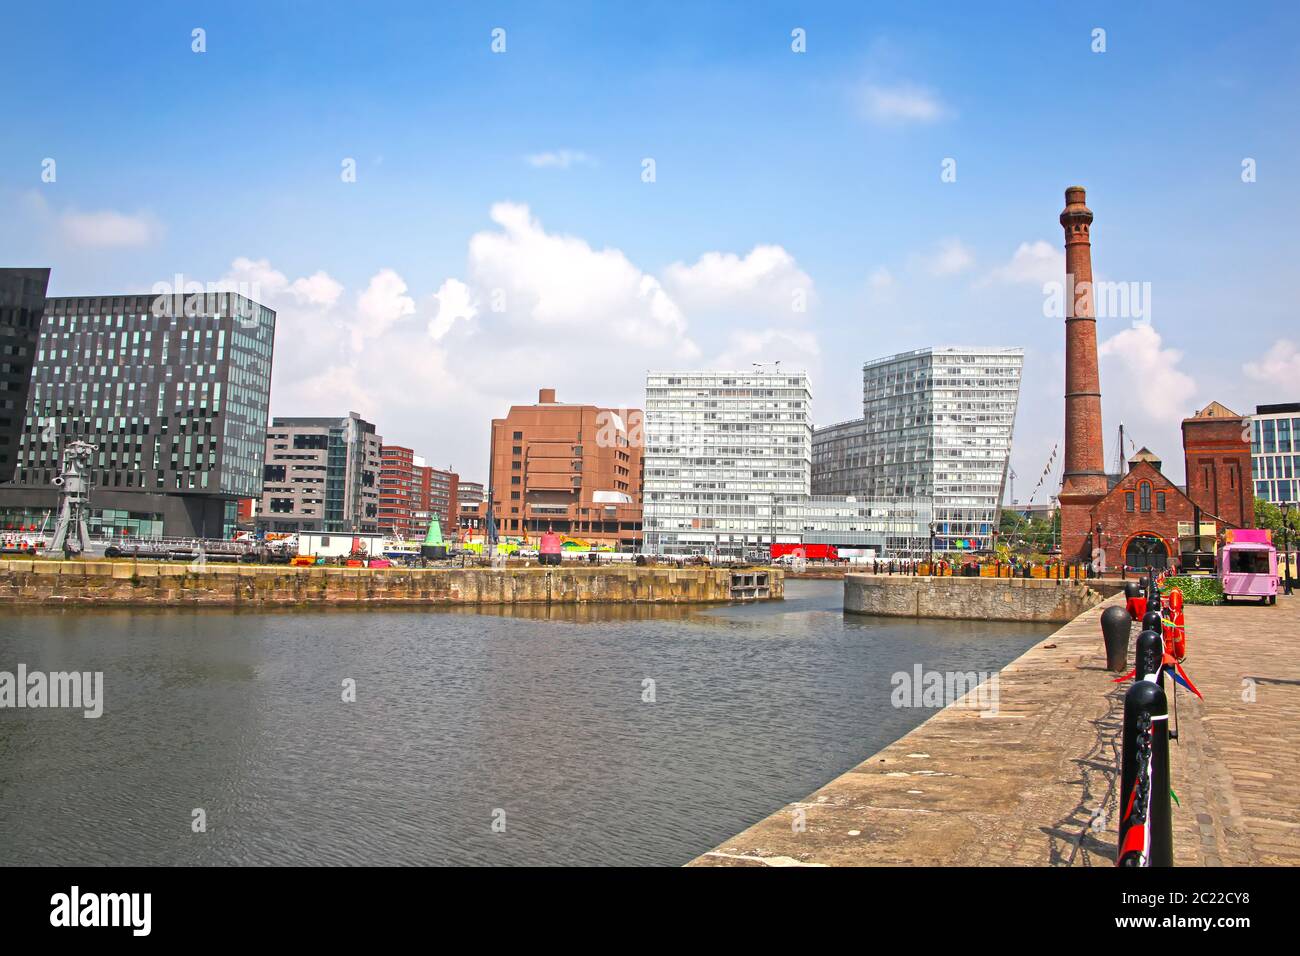 City views of the historic Canning Dock on the River Mersey, which is part of the Port of Liverpool, Northern England, UK. Stock Photo